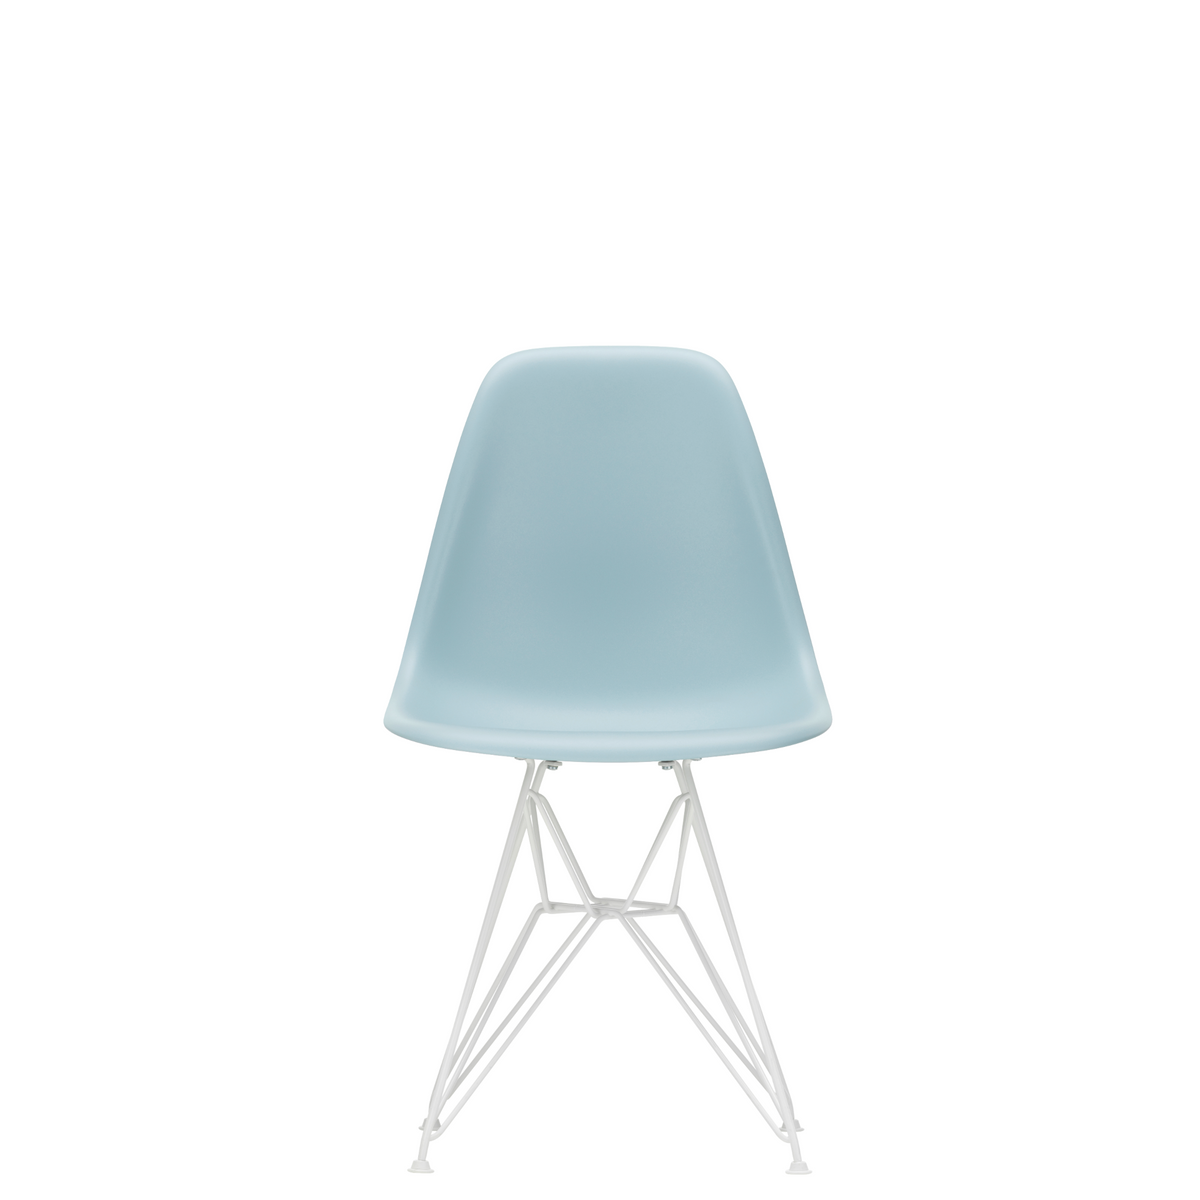 Vitra Eames Plastic Side Chair DSR Powder Coated for Outdoor Use Ice Grey Shell White Powdercoated Base